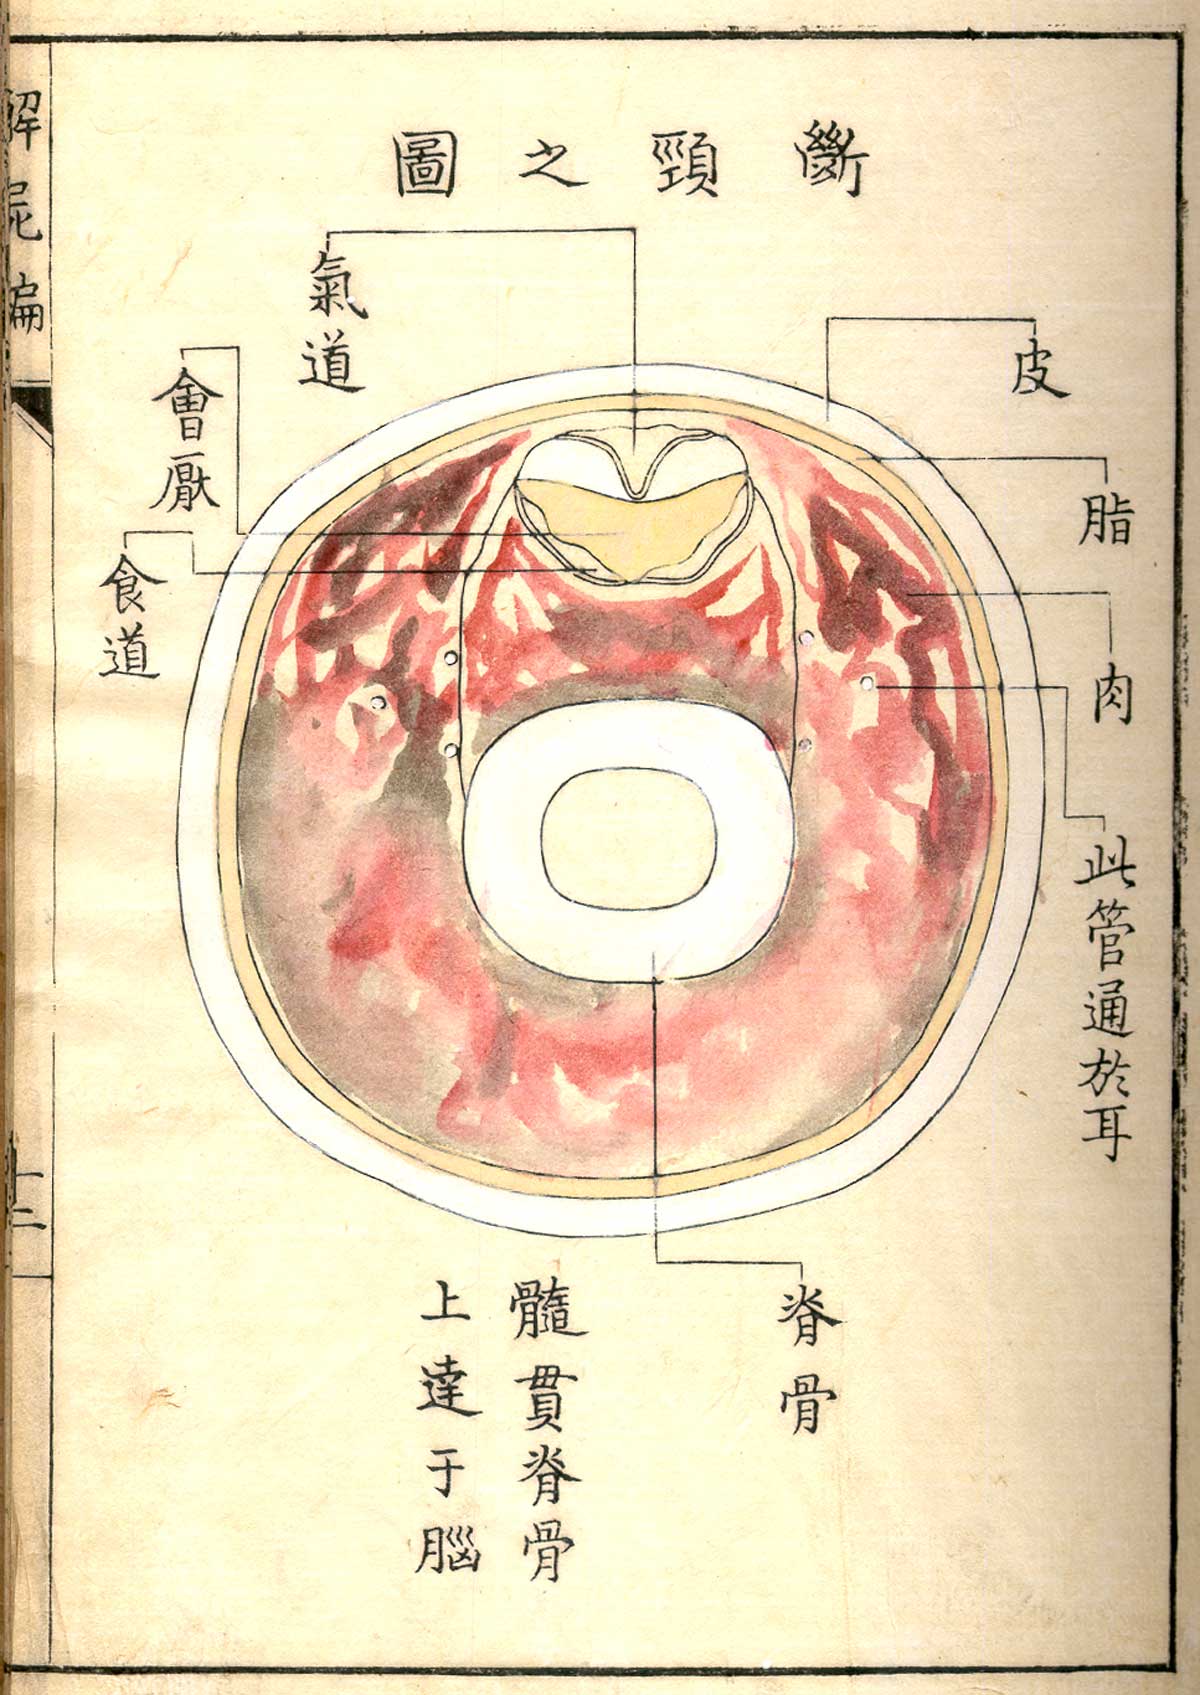 Hand colored woodcut of a cross section of the neck of a decapitated person, showing the spinal cord, trachea, and muscle tissue, from Shinnin Kawaguchi's Kaishi hen, NLM Call no.: WZ 260 K21k 1772.